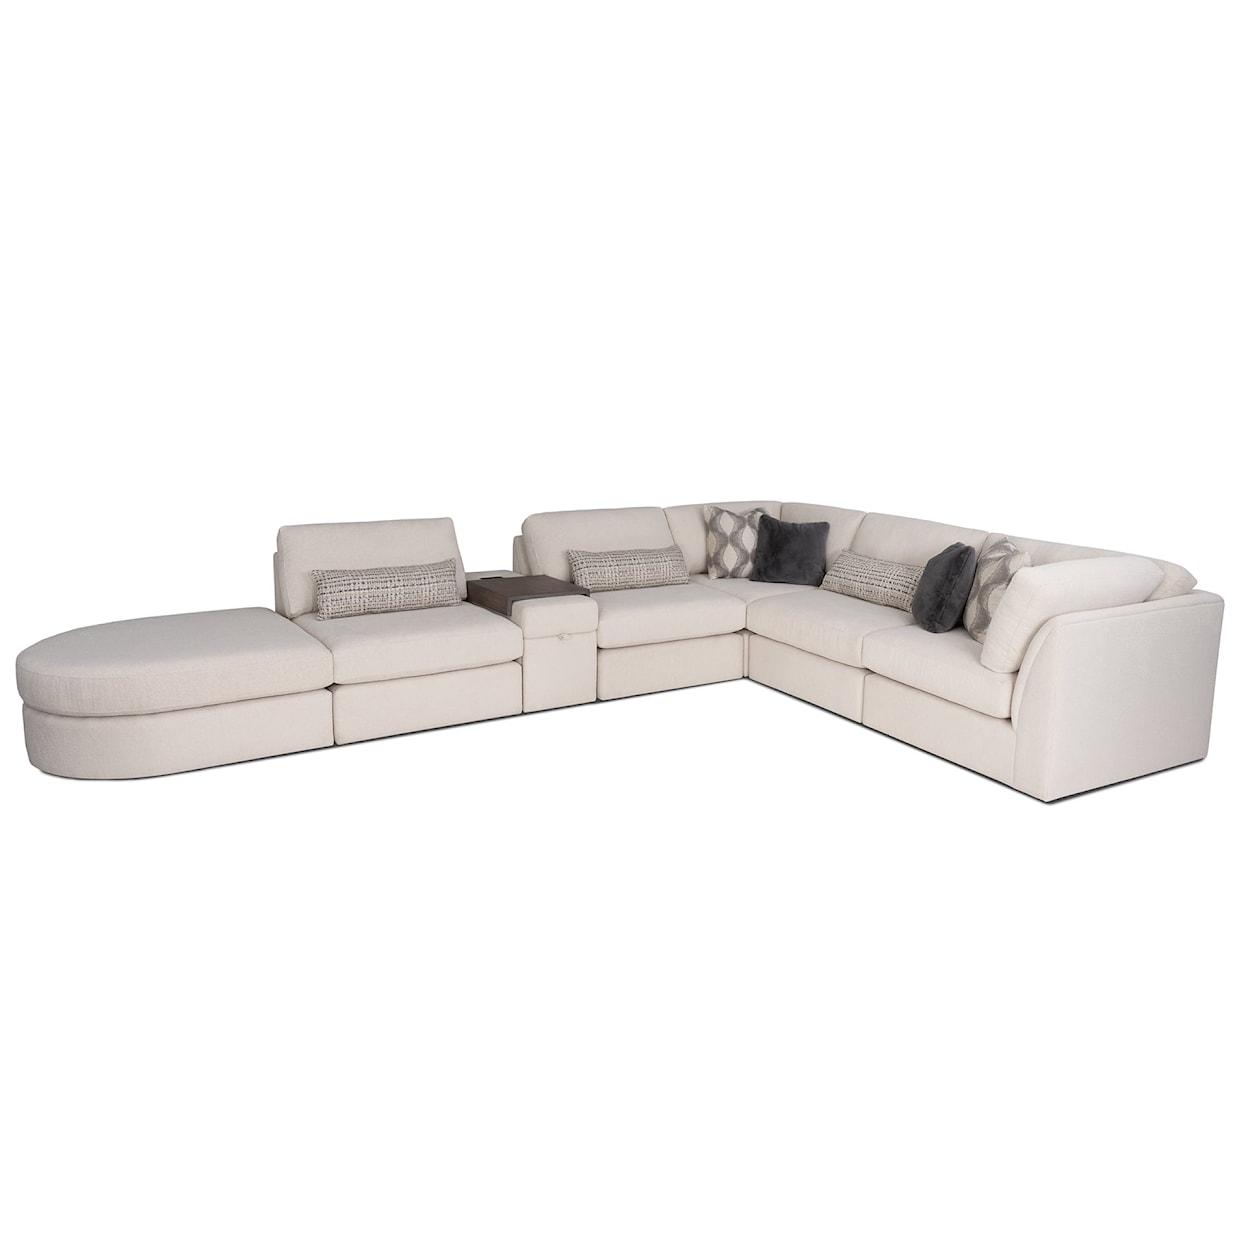 Smith Brothers 209 L-Shaped Sectional Sofa